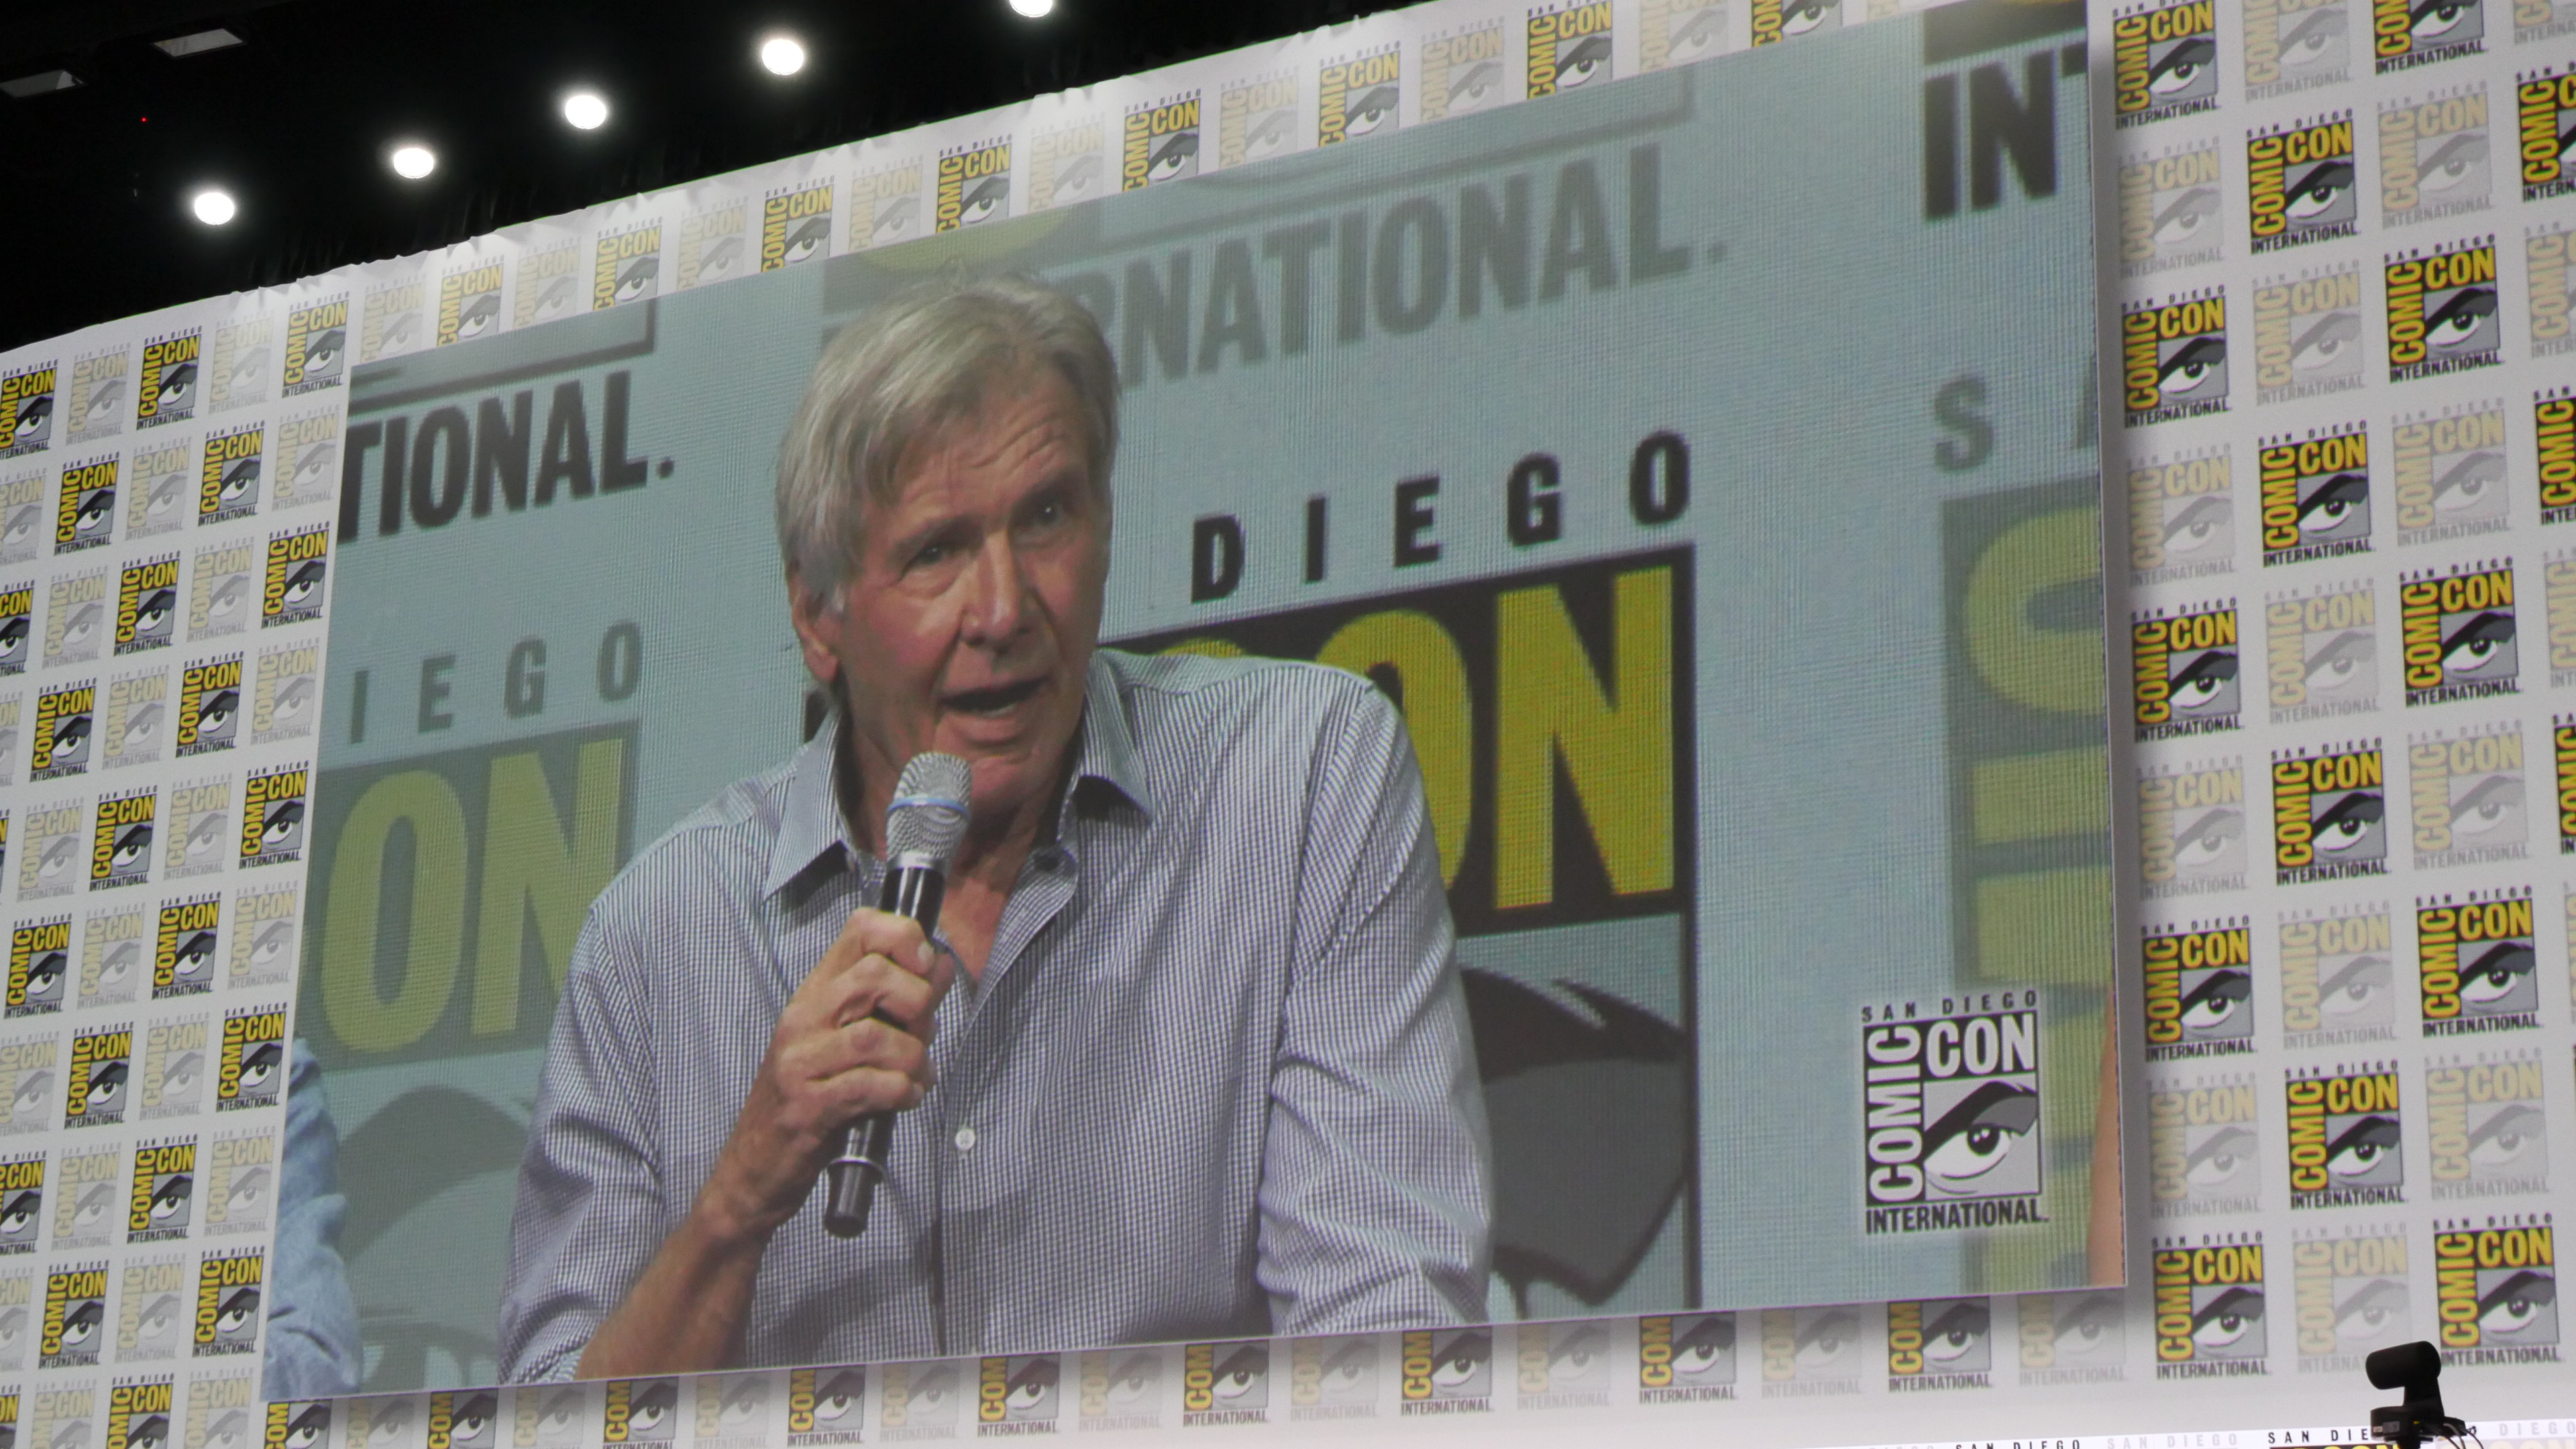 cheeky_audience_question_to_harrison_ford_-_is_it_your_goal_to_reboot_every_single_franchise_you_have_been_part_of_answer-_you_bet_your_ass_it_is